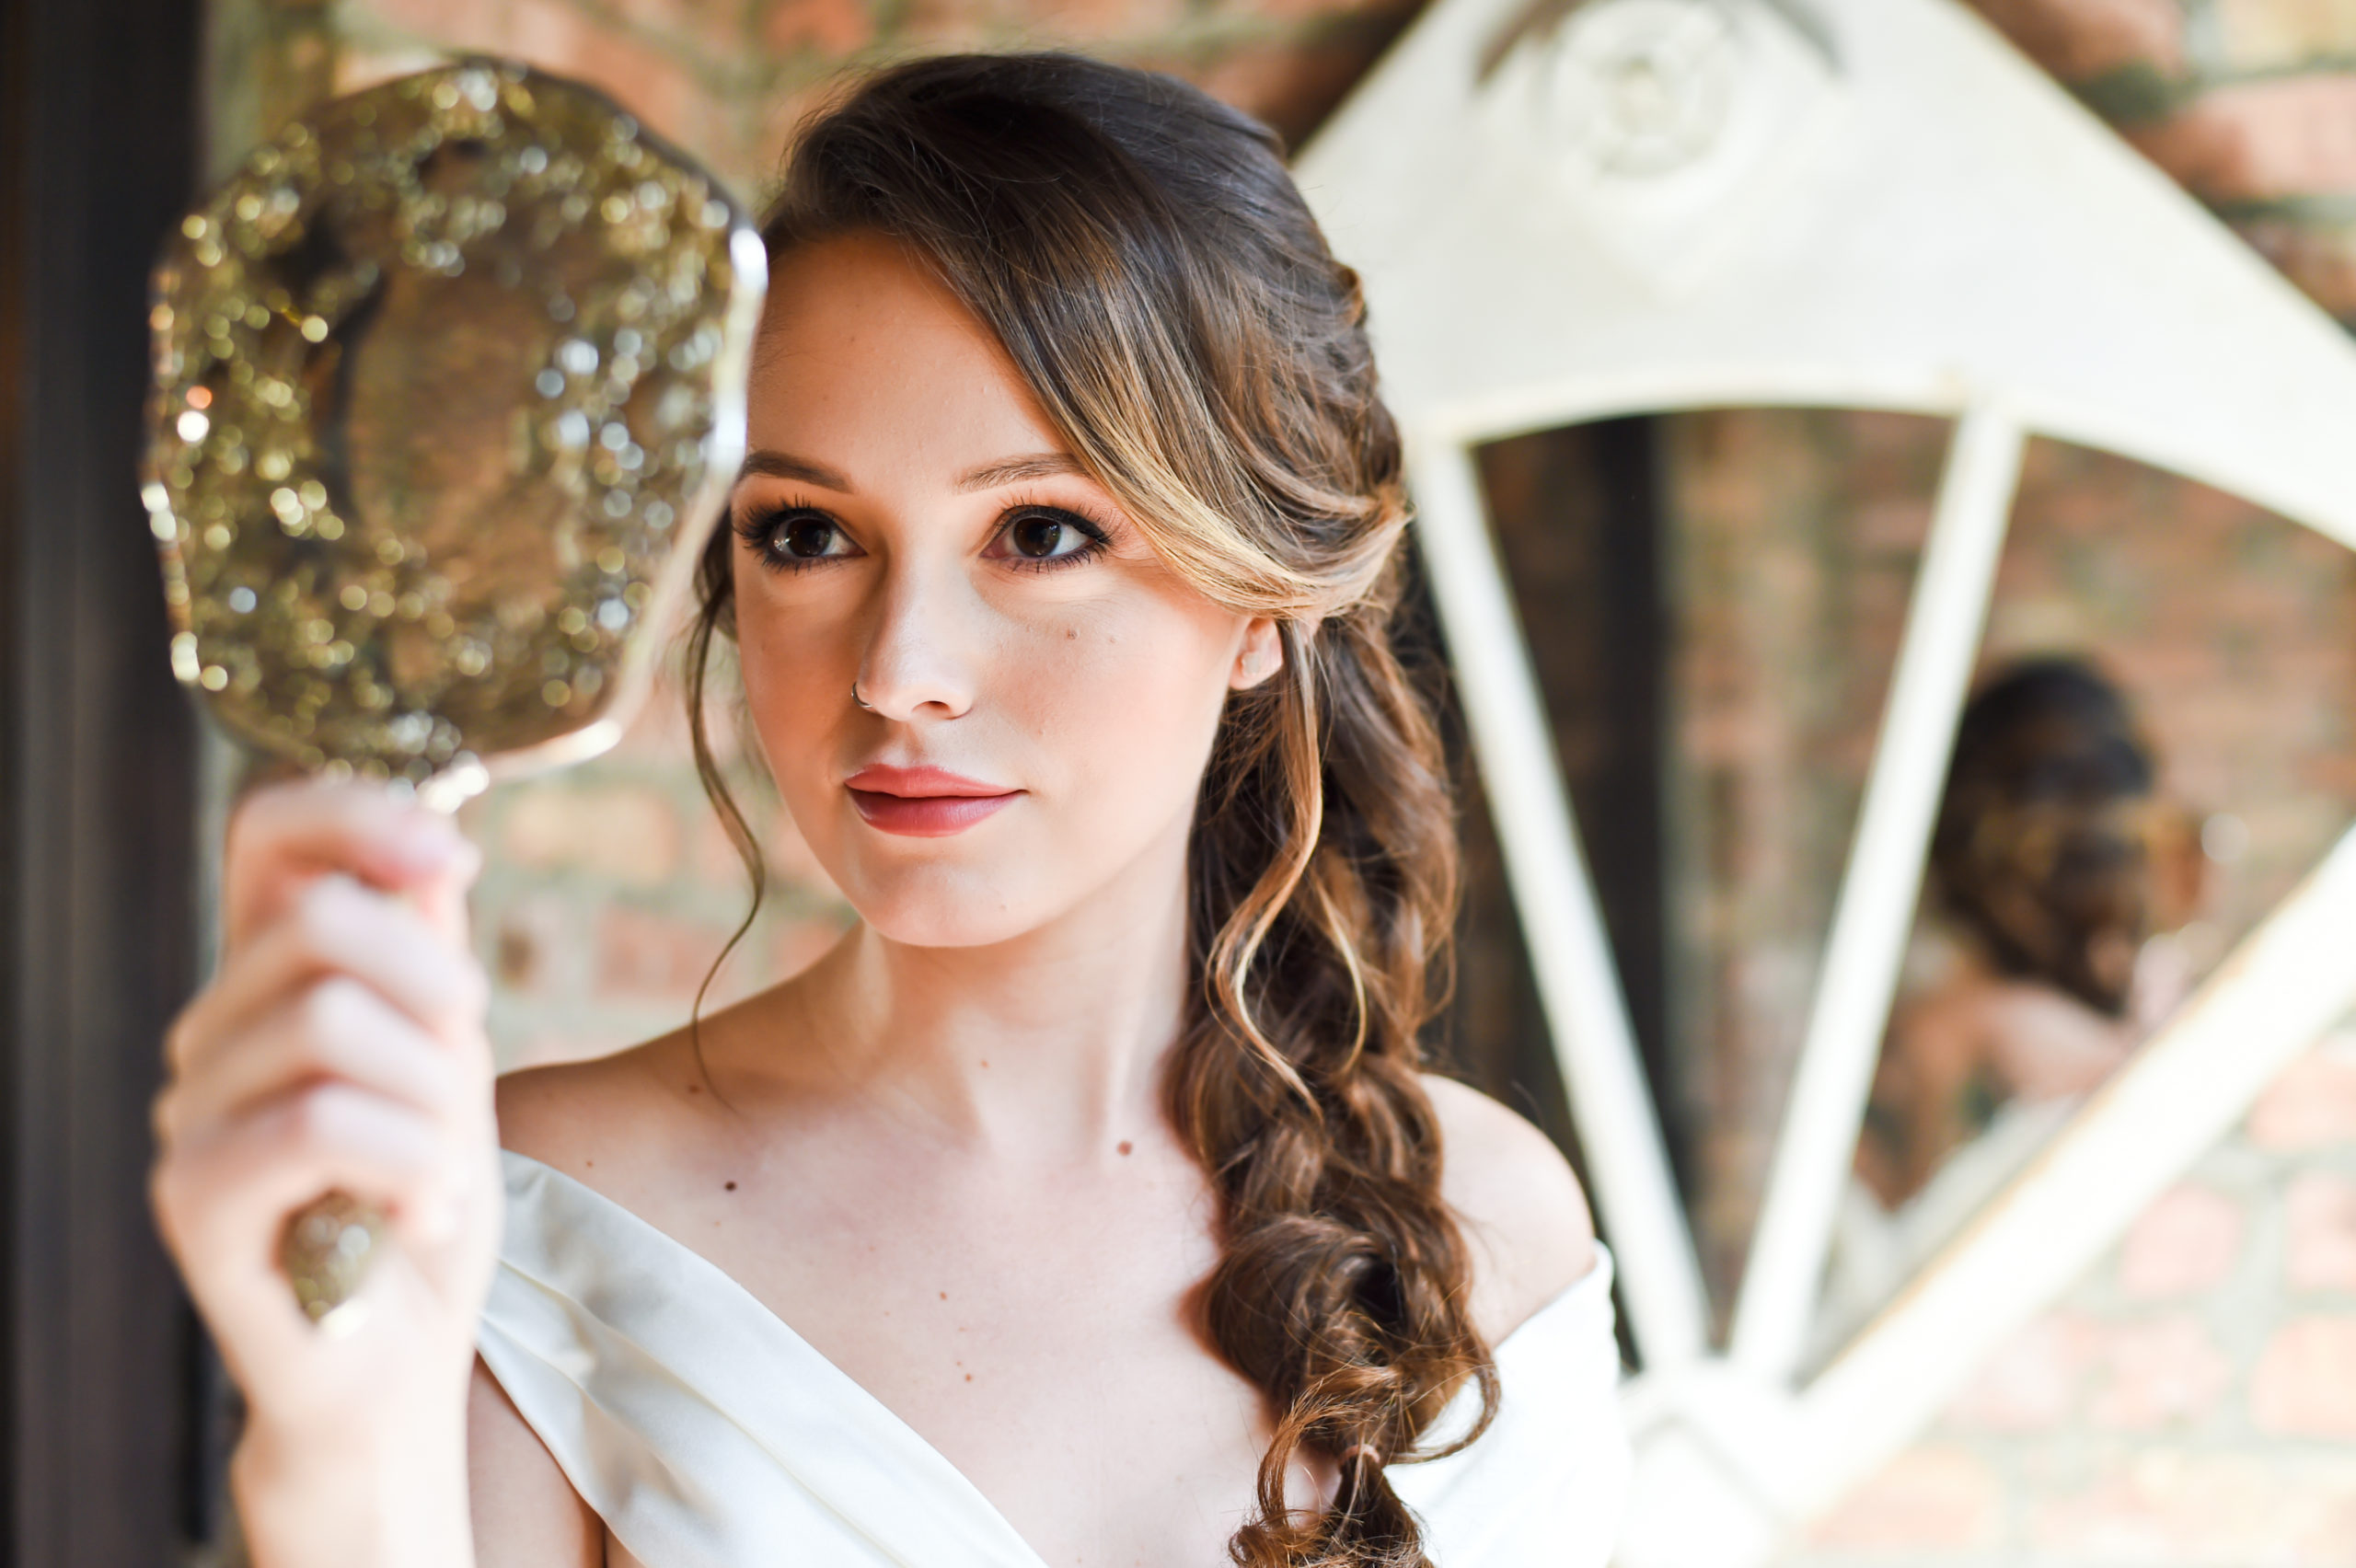 Our bride looked just like Belle with loose wedding curls and natural bronze makeup